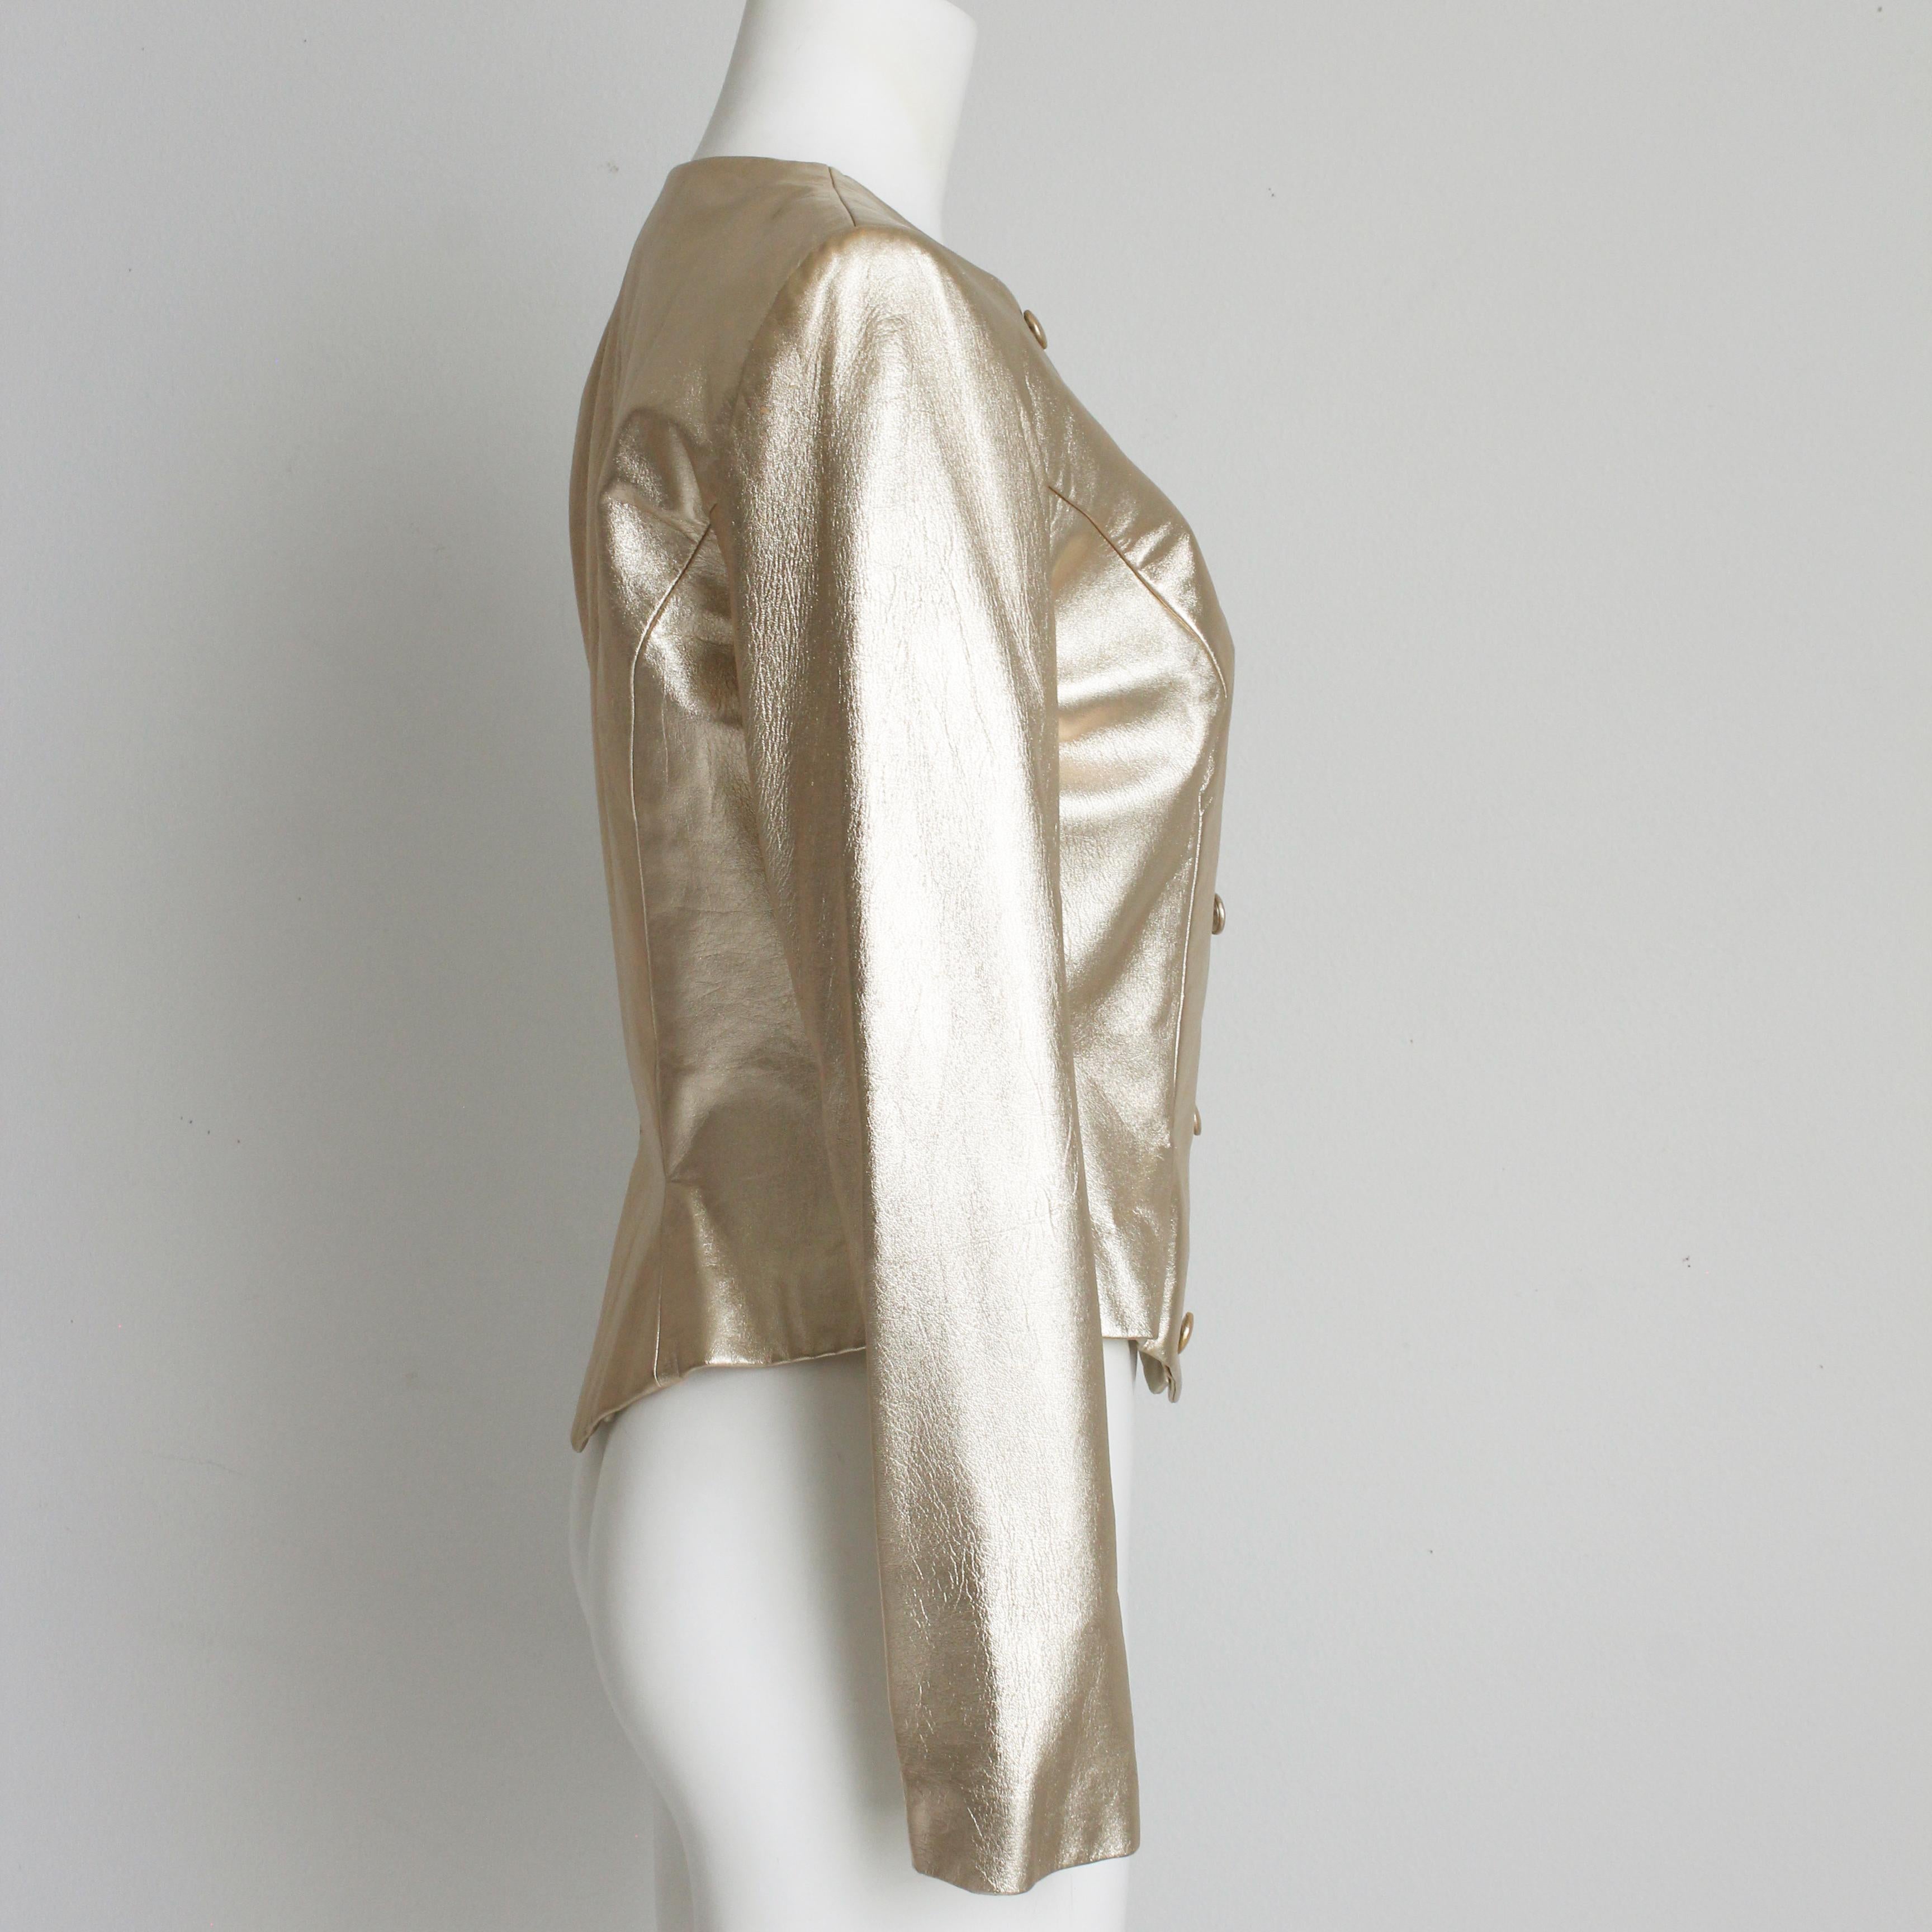 Vicky Tiel Couture Jacket Metallic Gold Leather Formal Evening Vintage Size 42 For Sale 1